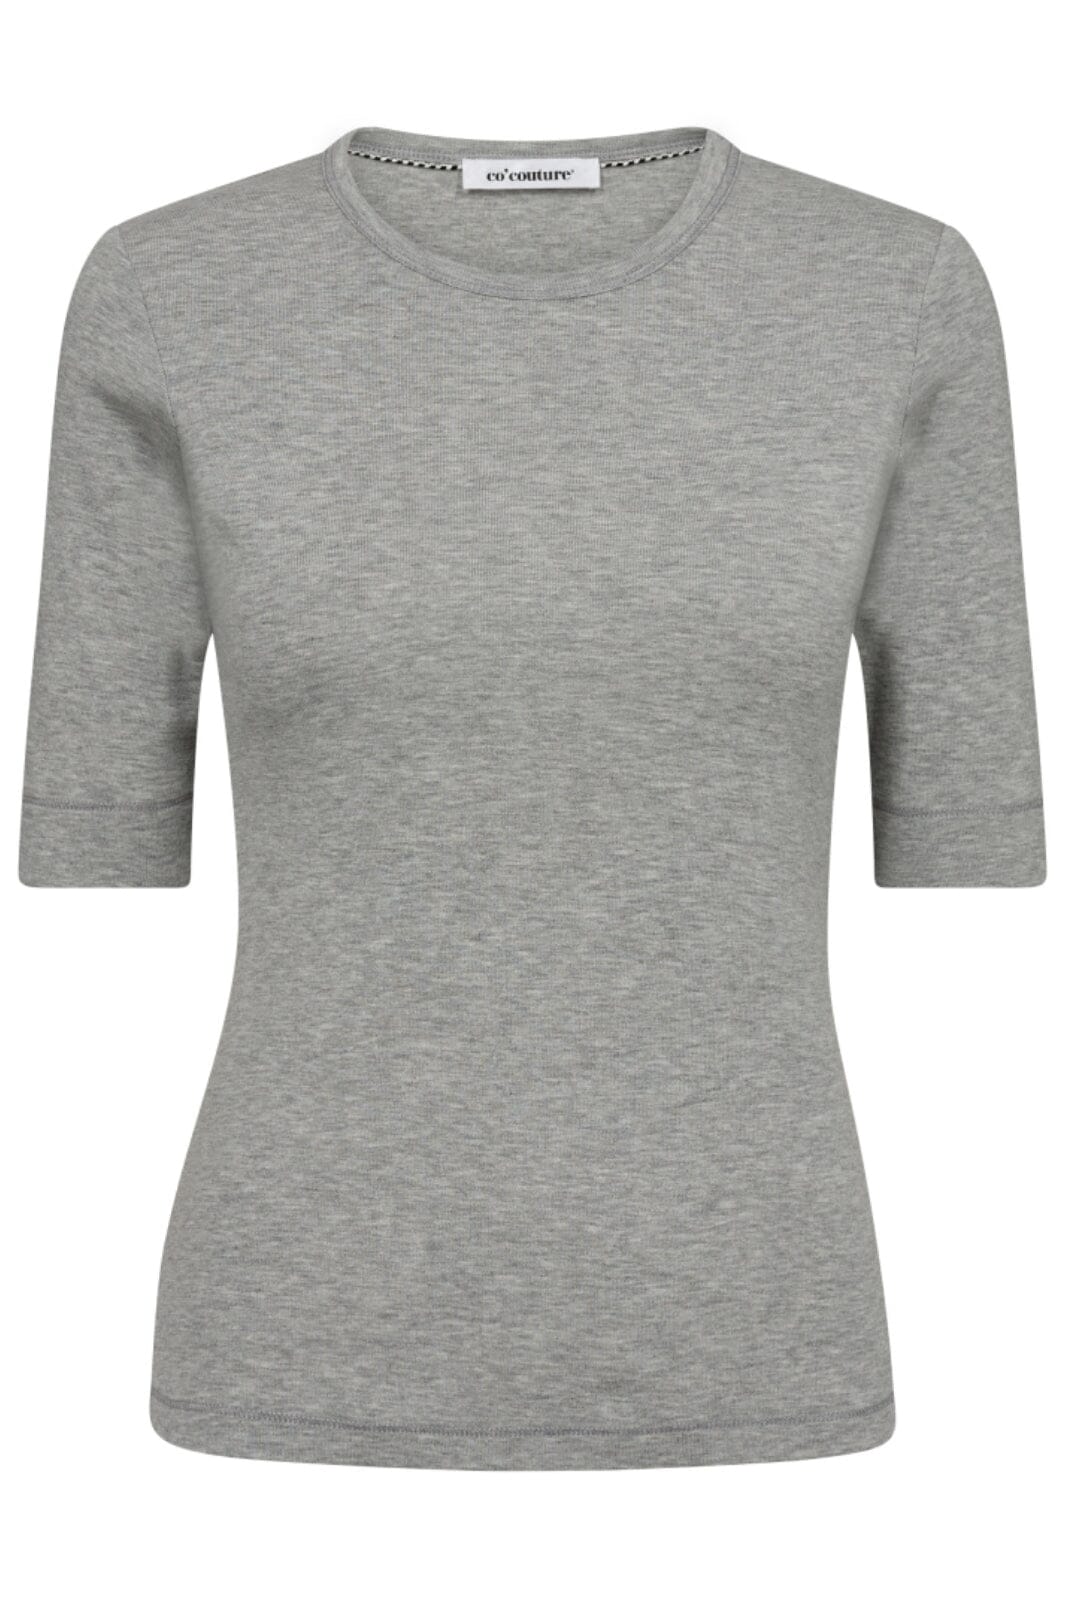 Co´couture - Grannycc Ss Tee 33016 - 57 Grey Melange T-shirts 